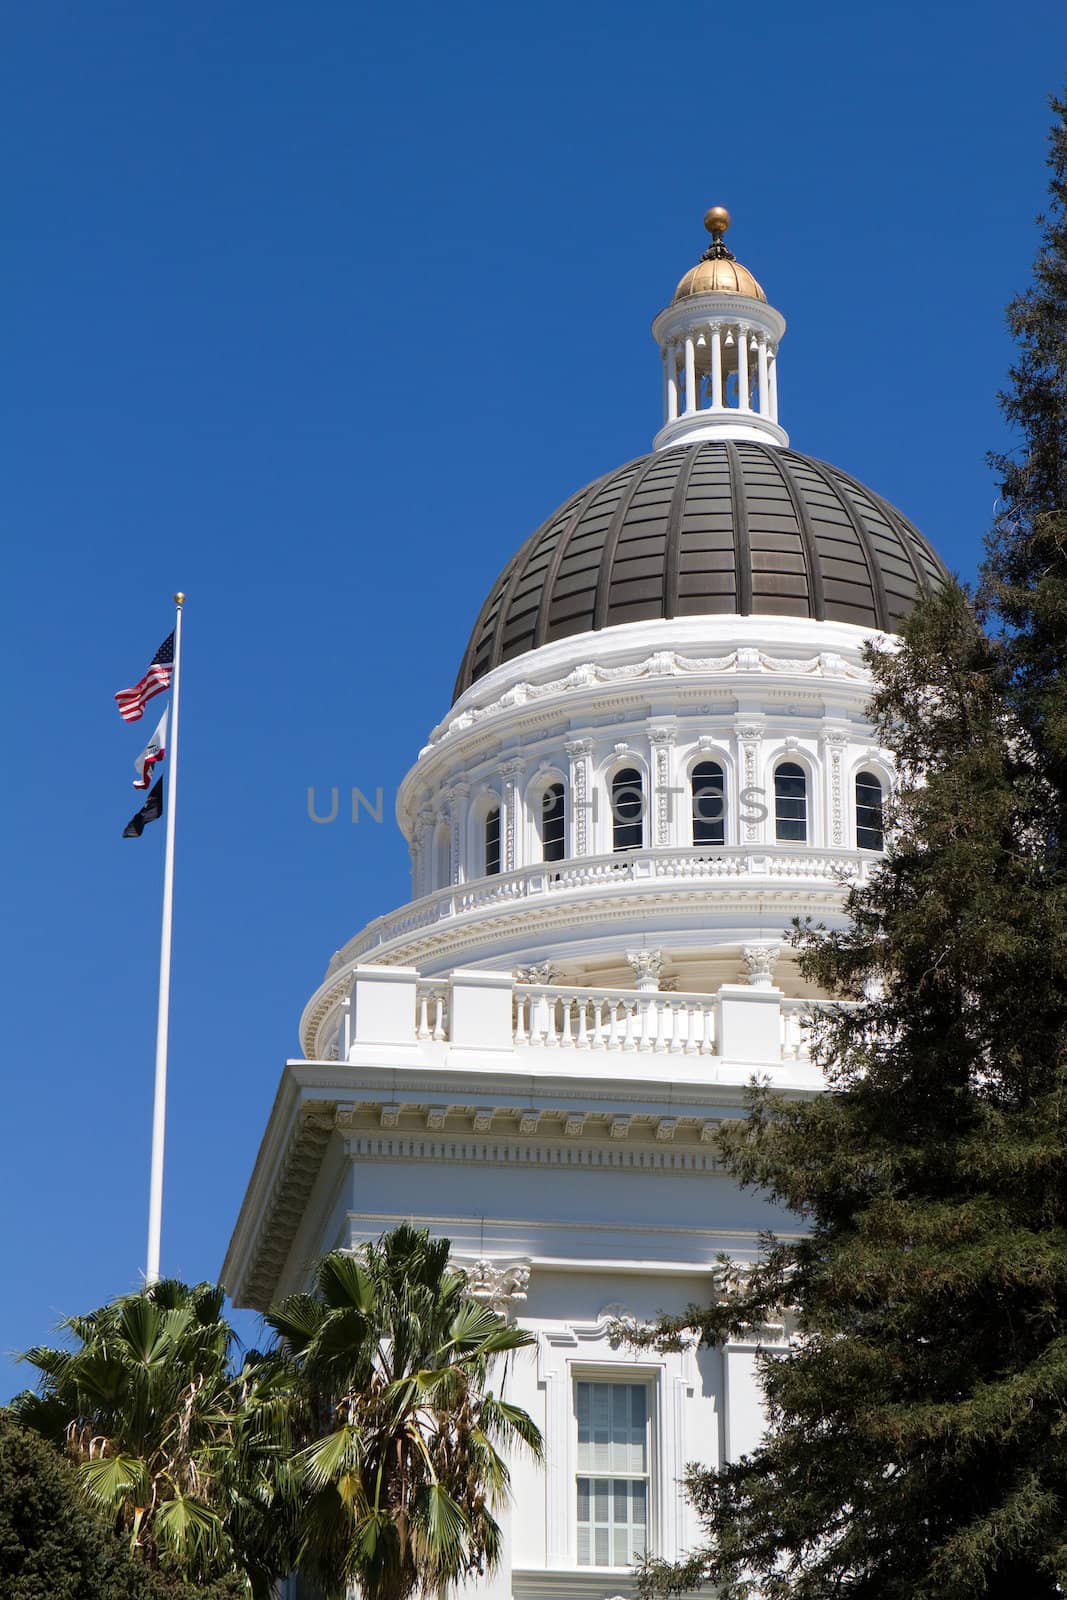 California Capitol Dome by sframe